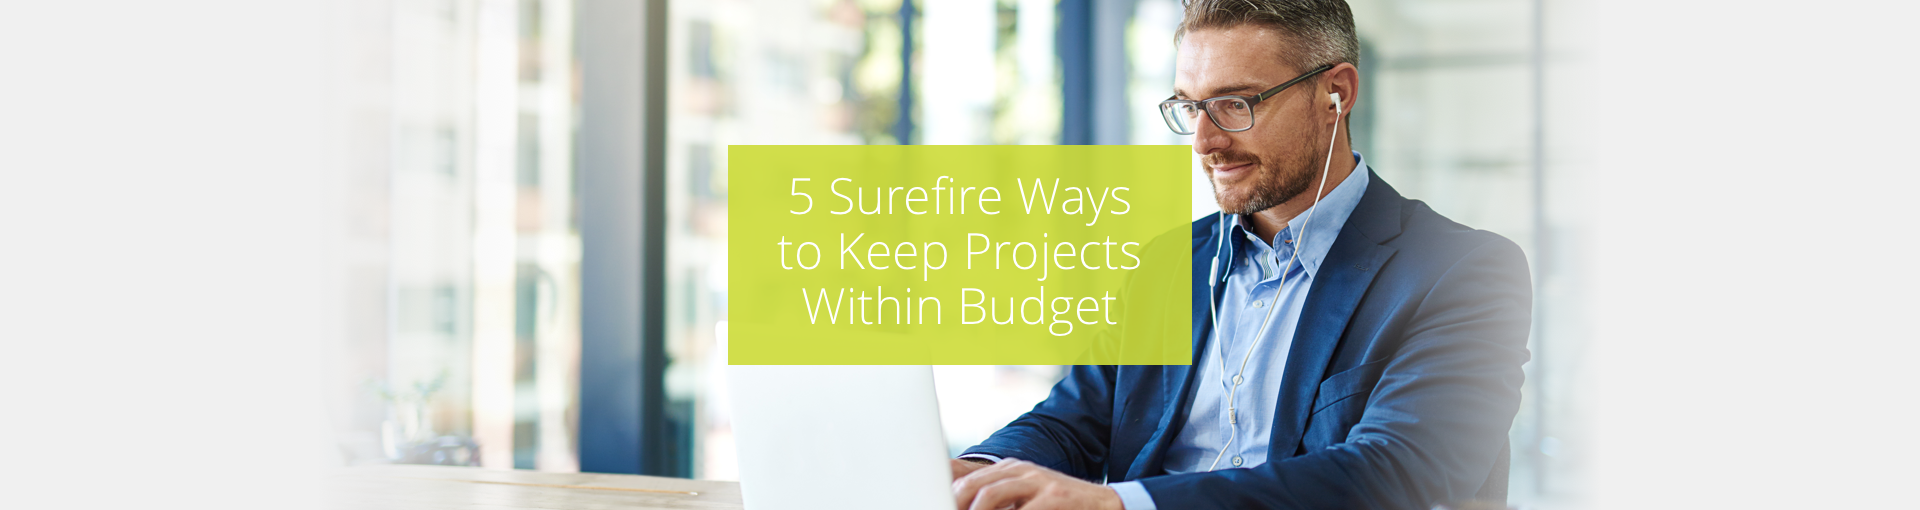 5 Surefire Ways to Keep Projects Within Budget Featured Image